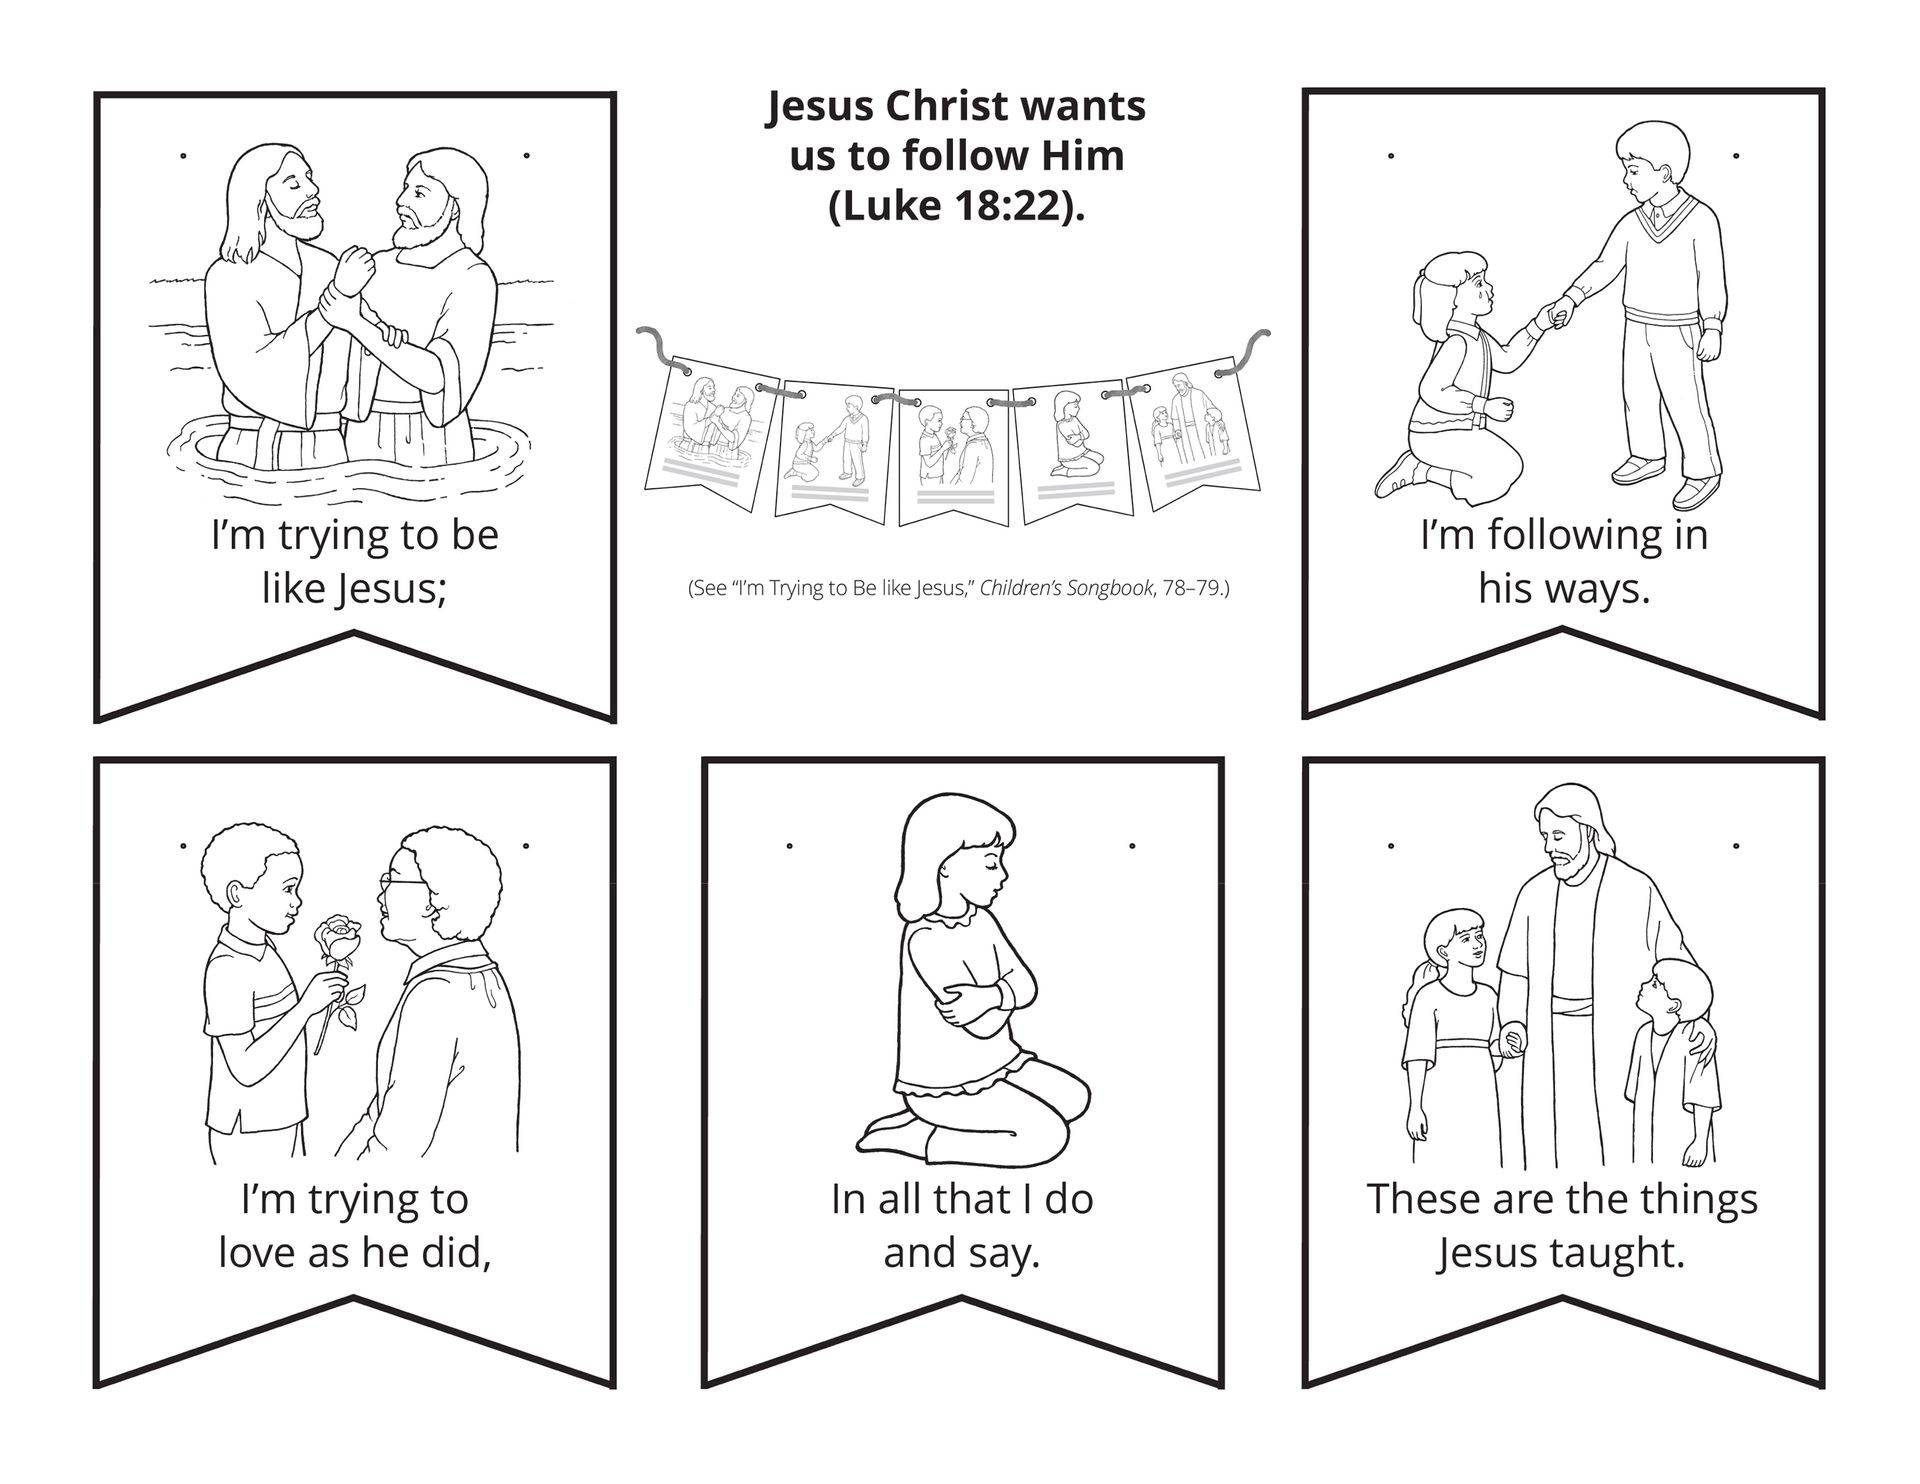 Five illustrations of people following Jesus Christ.